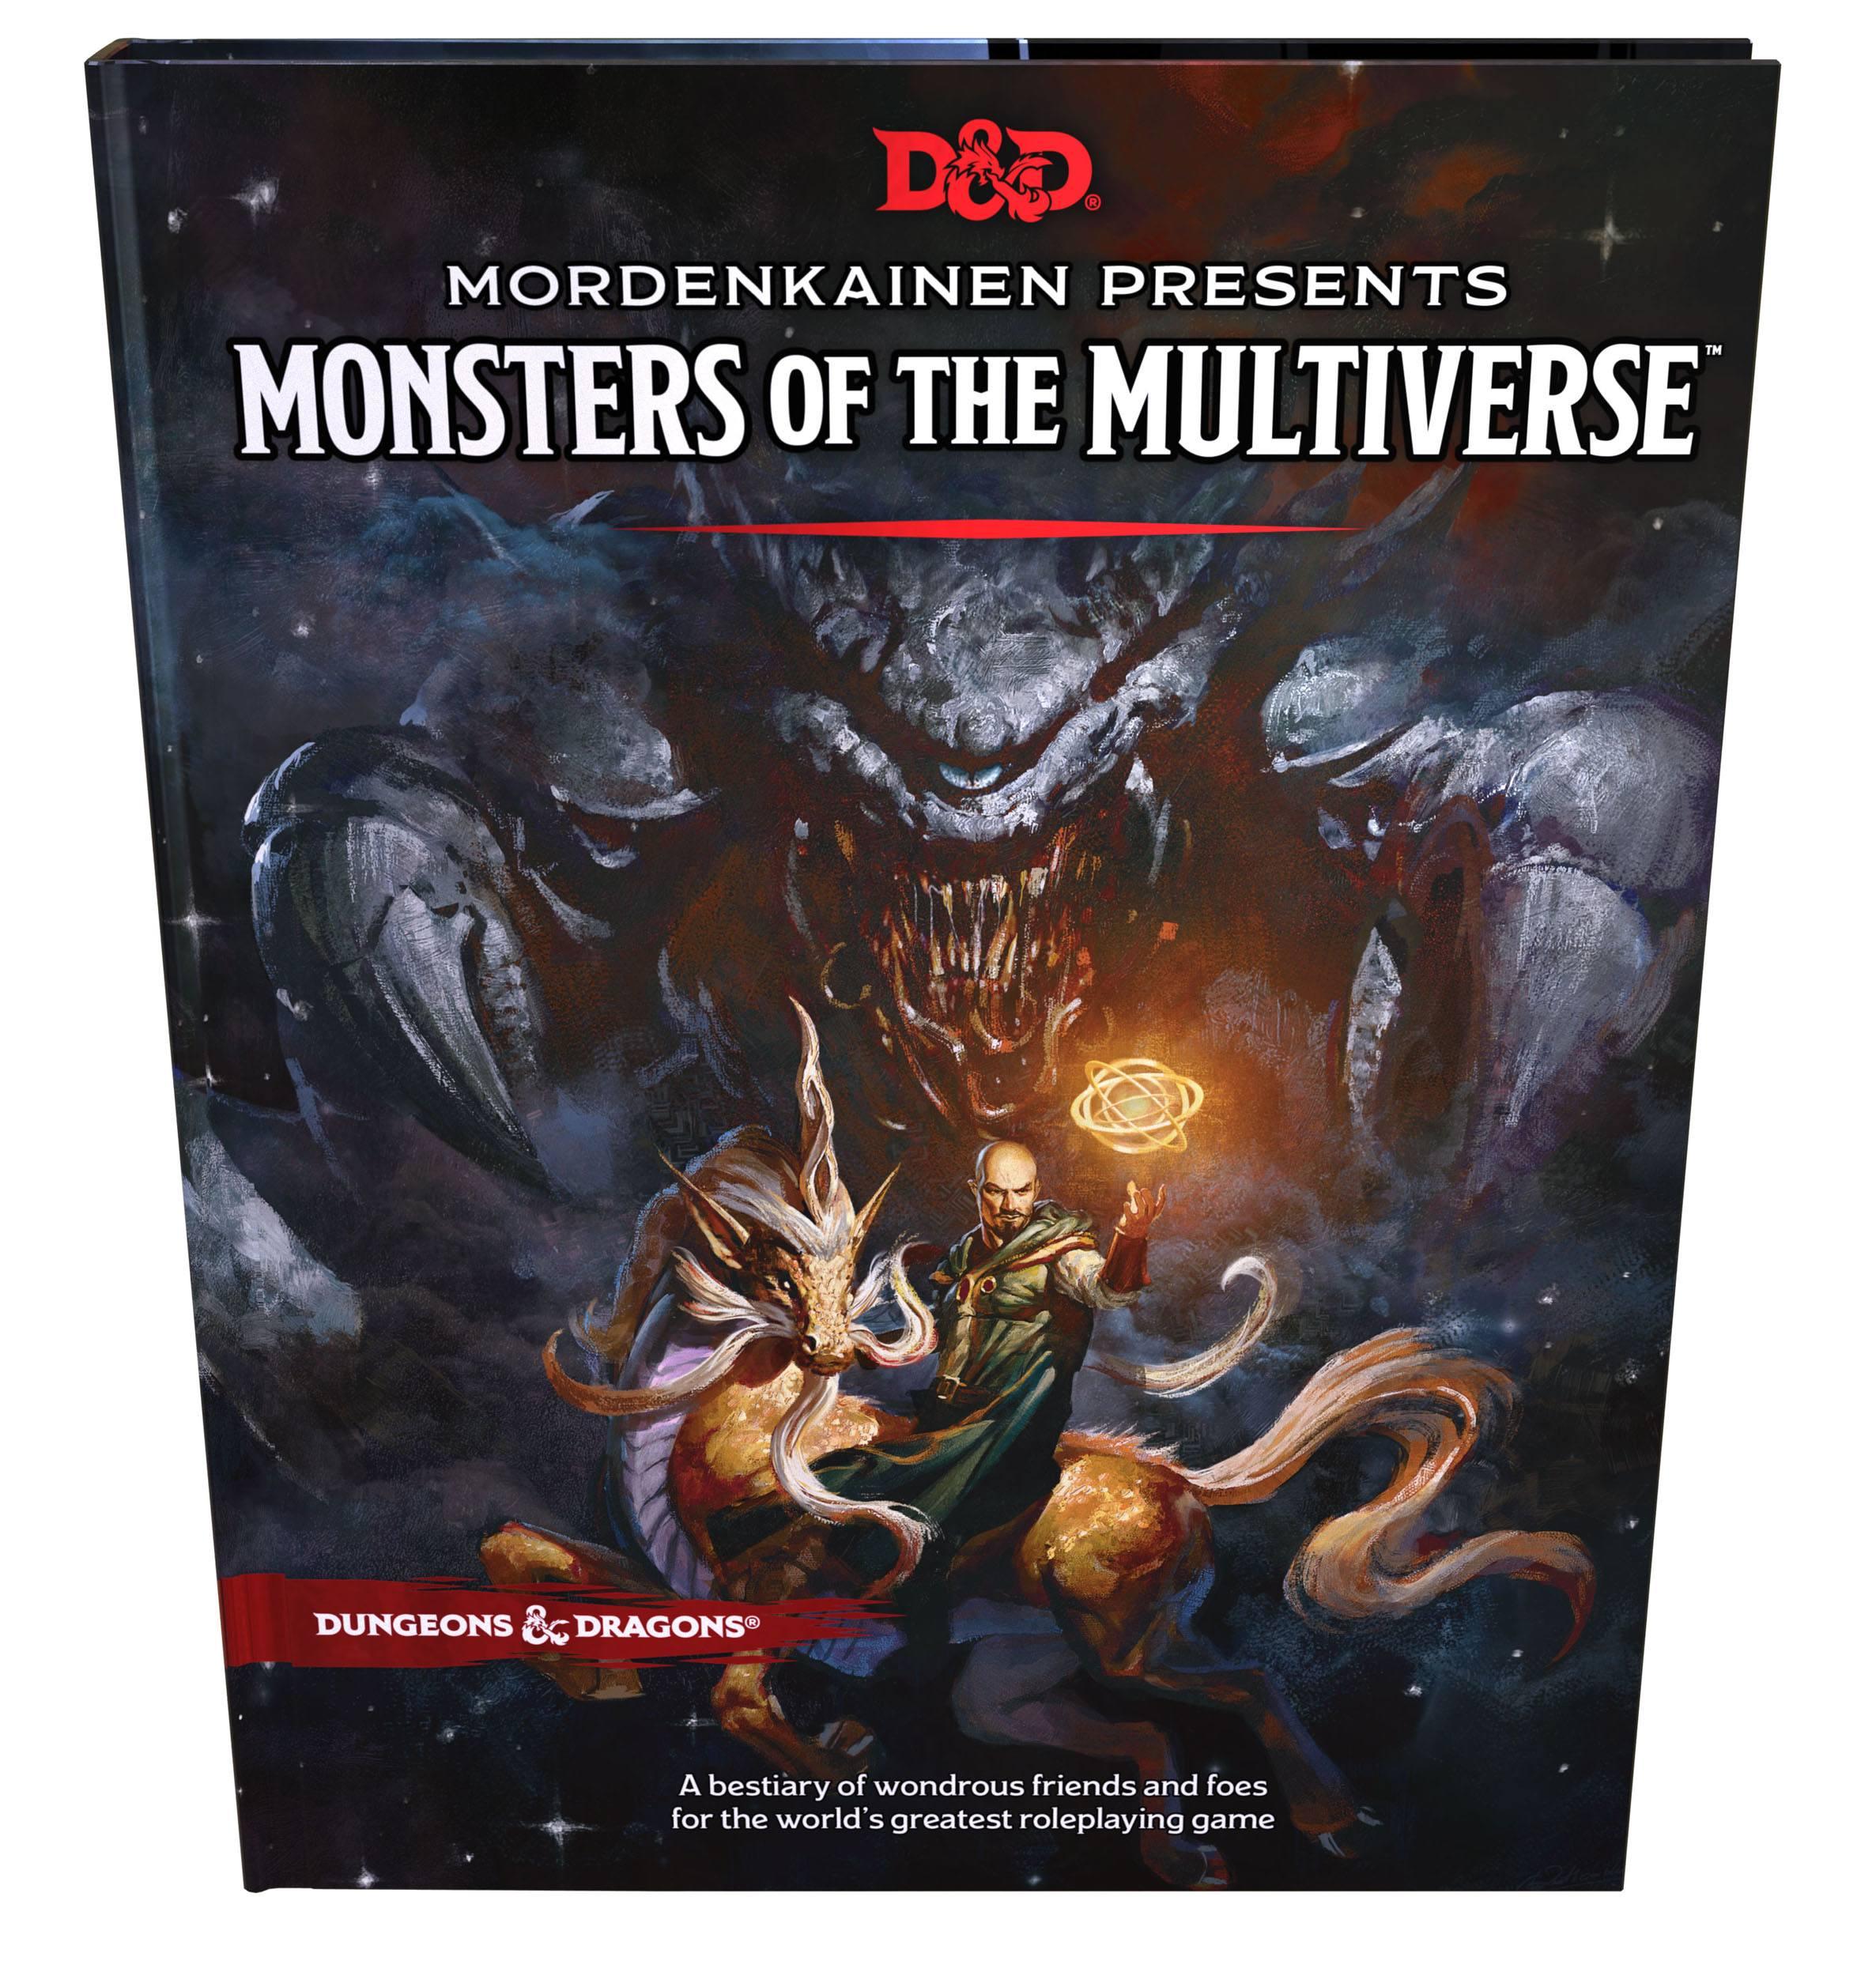 Back to the multiverse. Mordenkainen presents: Monsters of the Multiverse книга. Monsters of the Multiverse. Mordenkainen presents: Monsters of the Multiverse. Mordenkainen presents: Monsters of the Multiverse книга обложка.